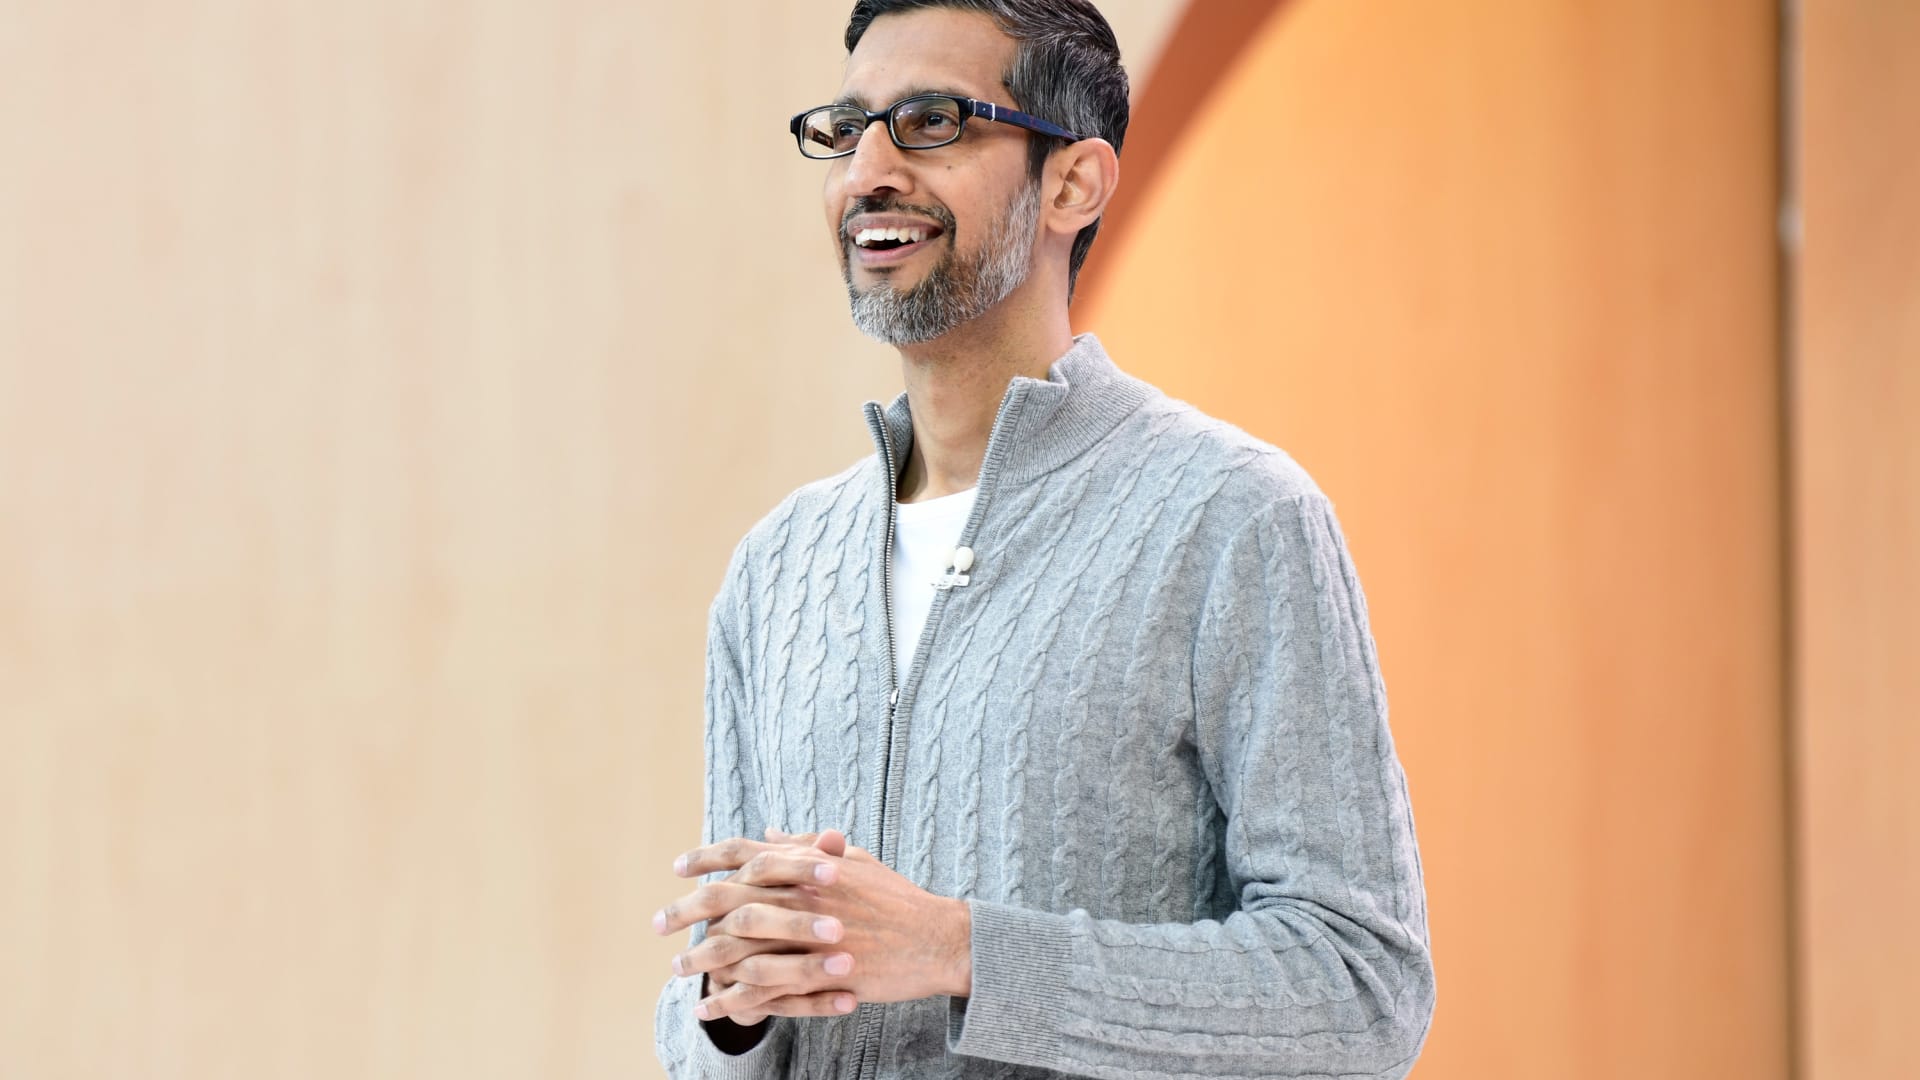 Alphabet reportedly weighing offer for HubSpot, sending shares in the $32 billion marketing company up 7%